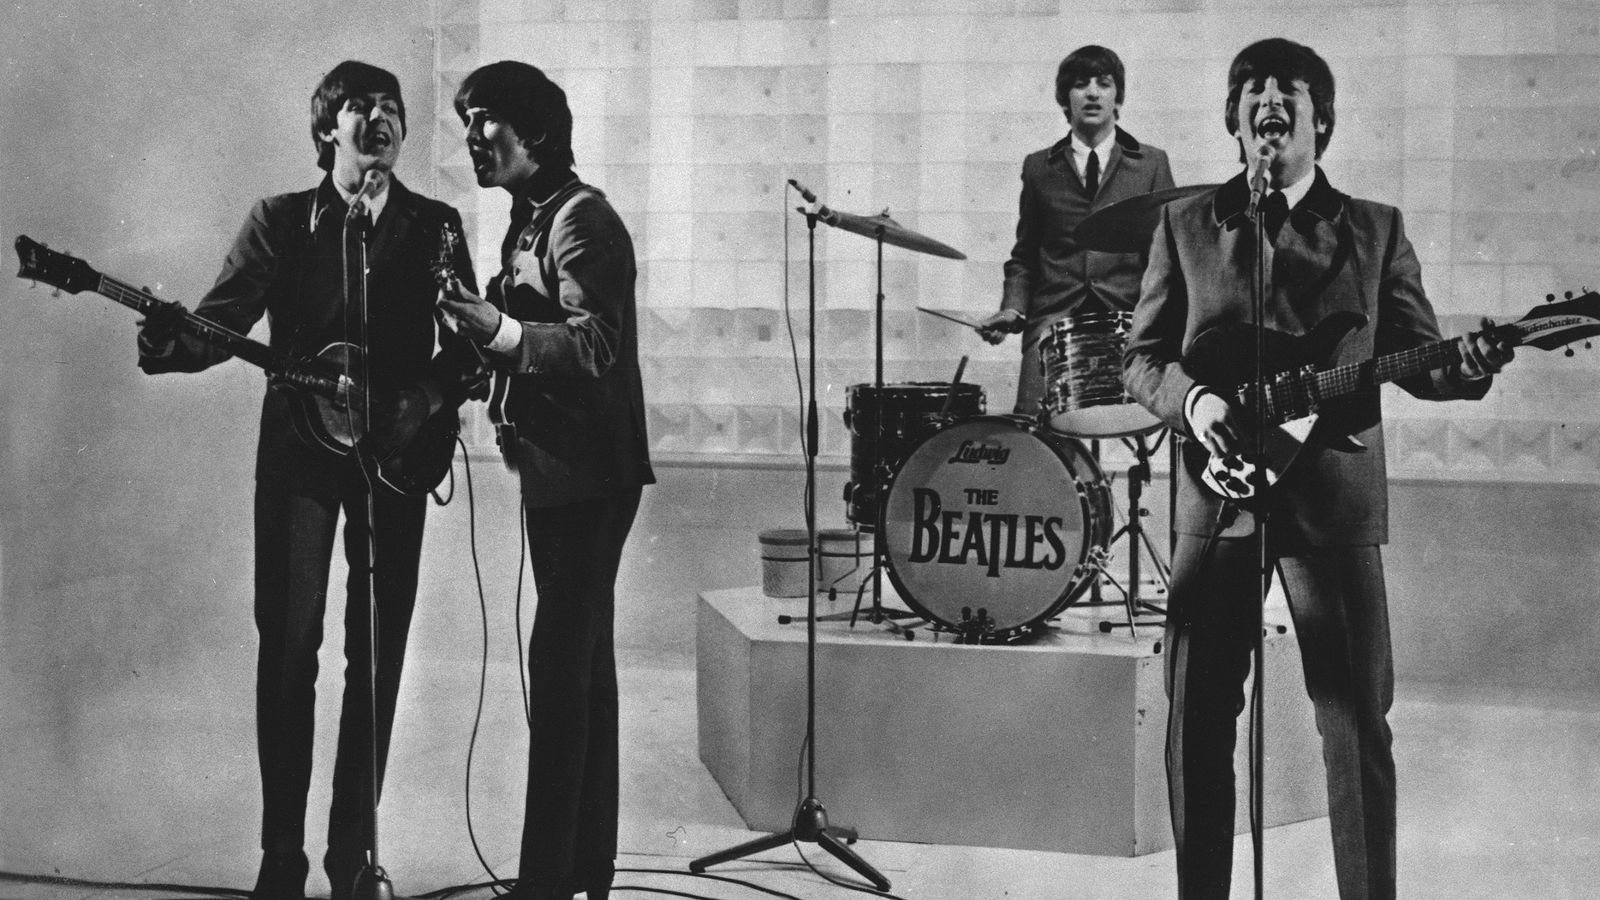 The Beatles: New track featuring all four band members set for release next week